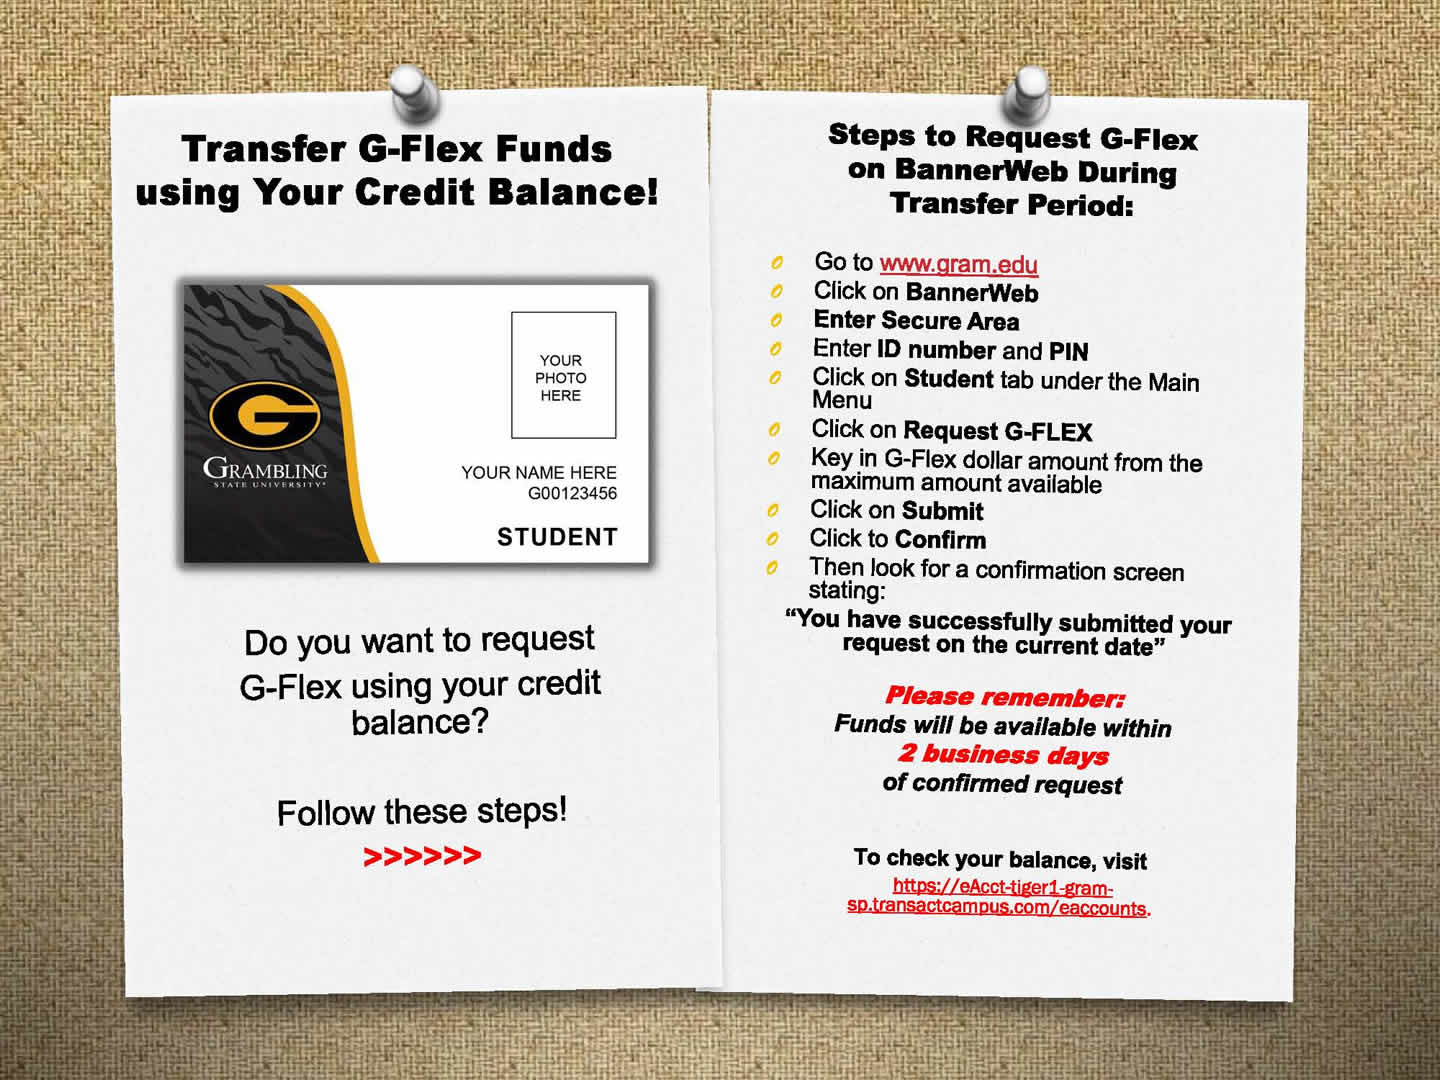 Transfer G-Flex Funds  using Your Credit Balance flyer